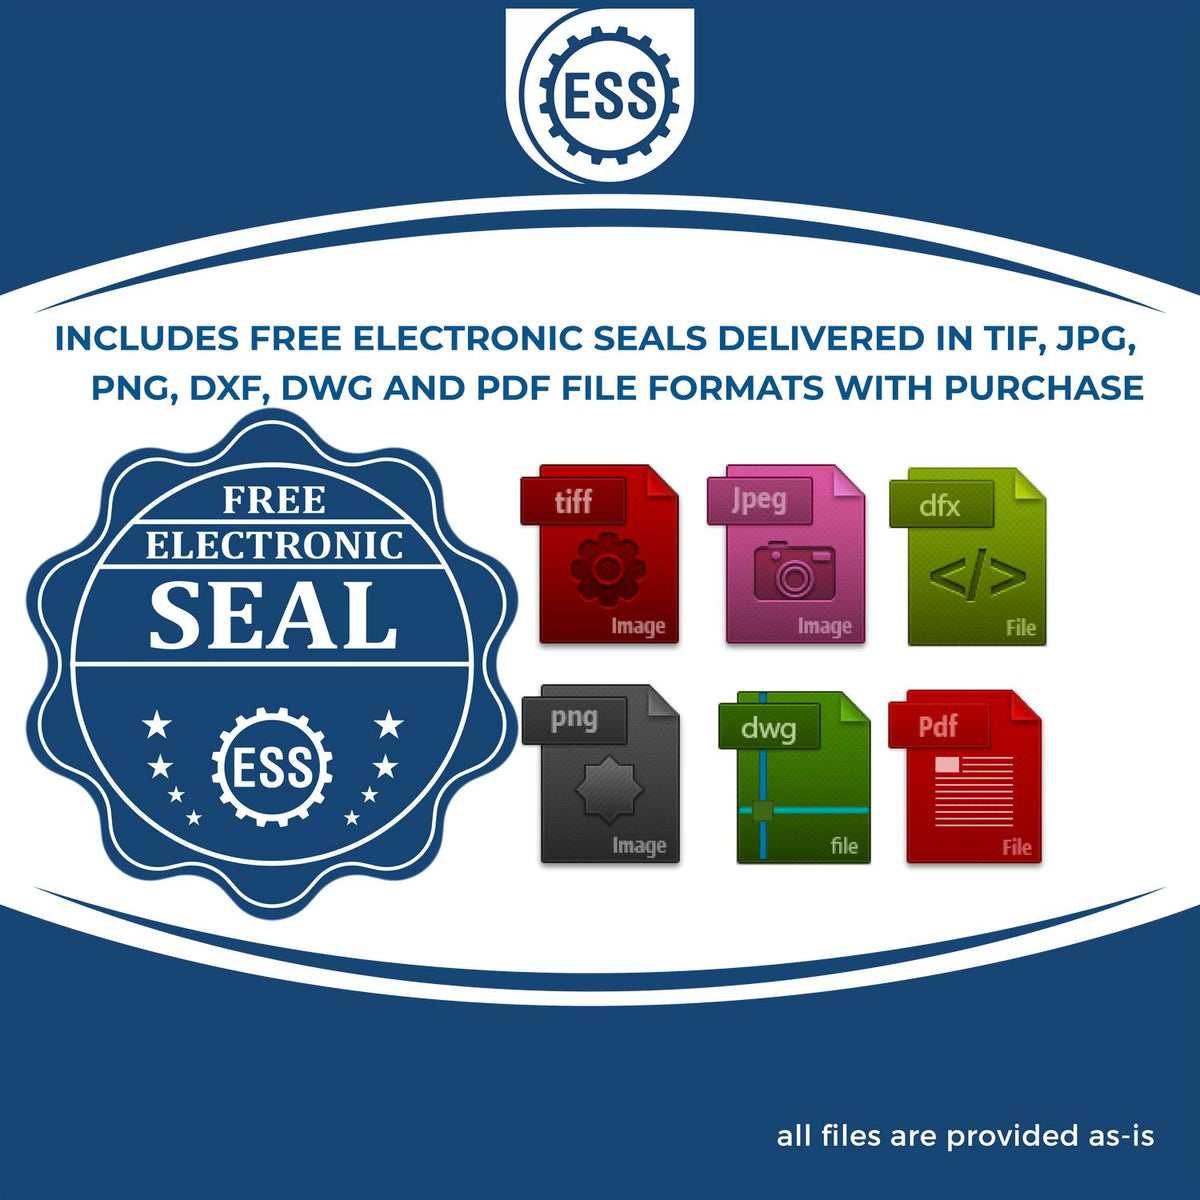 An infographic for the free electronic seal for the Iowa Desk Architect Embossing Seal illustrating the different file type icons such as DXF, DWG, TIF, JPG and PNG.